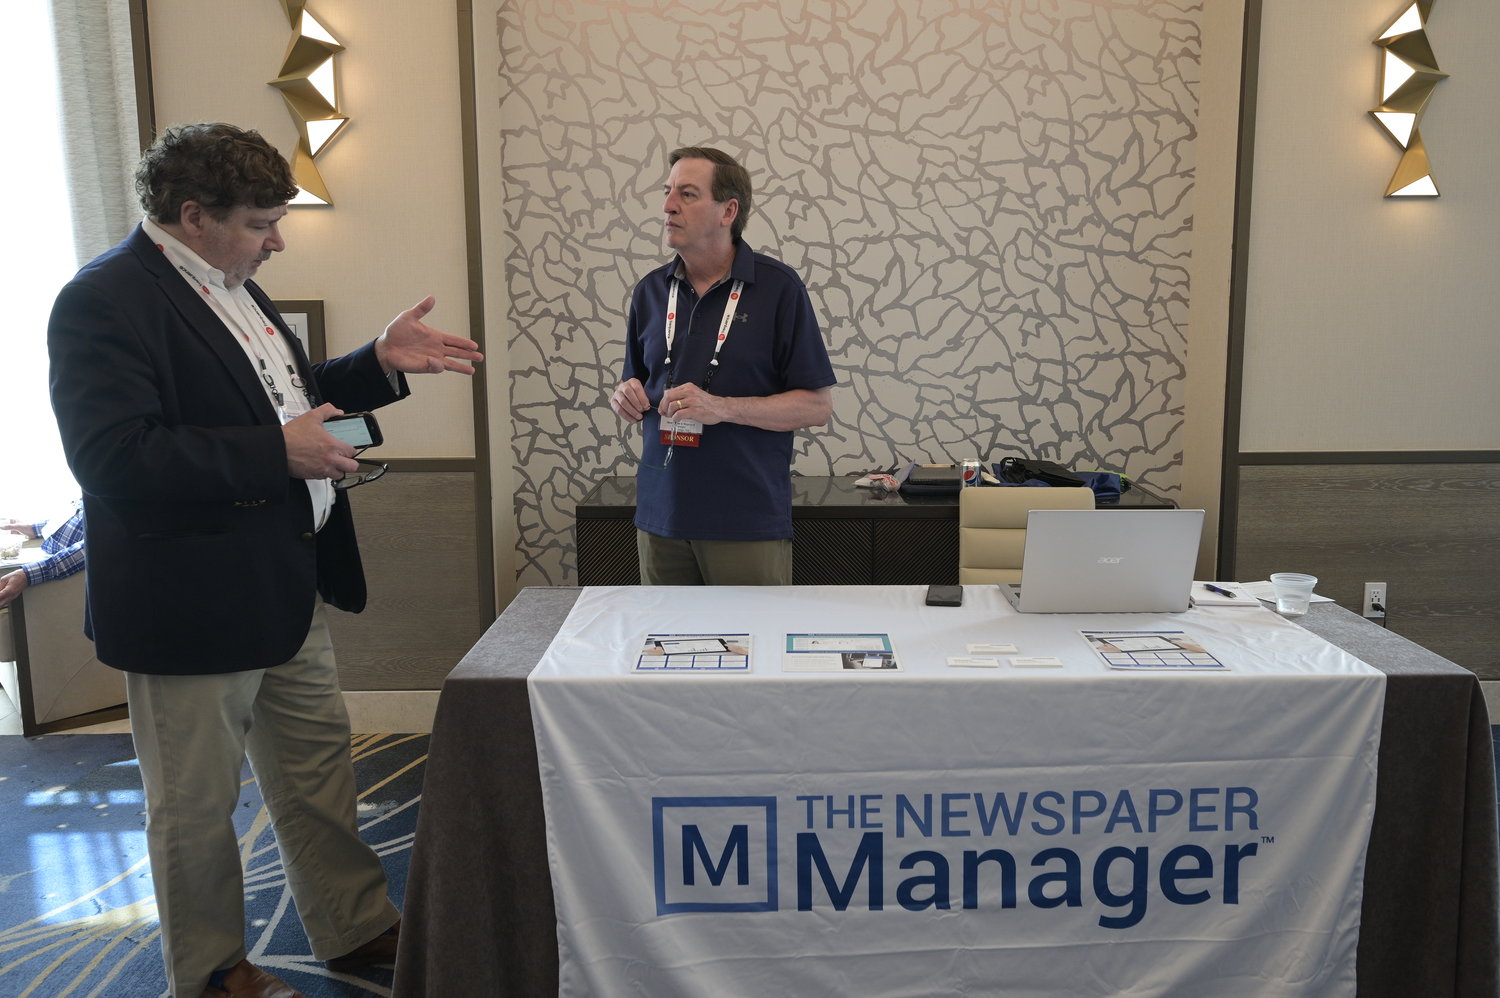 Mirabel Technologies - The Newspaper Manager -- a conference exhibitor (Photo by Phelan M. Ebenhack)